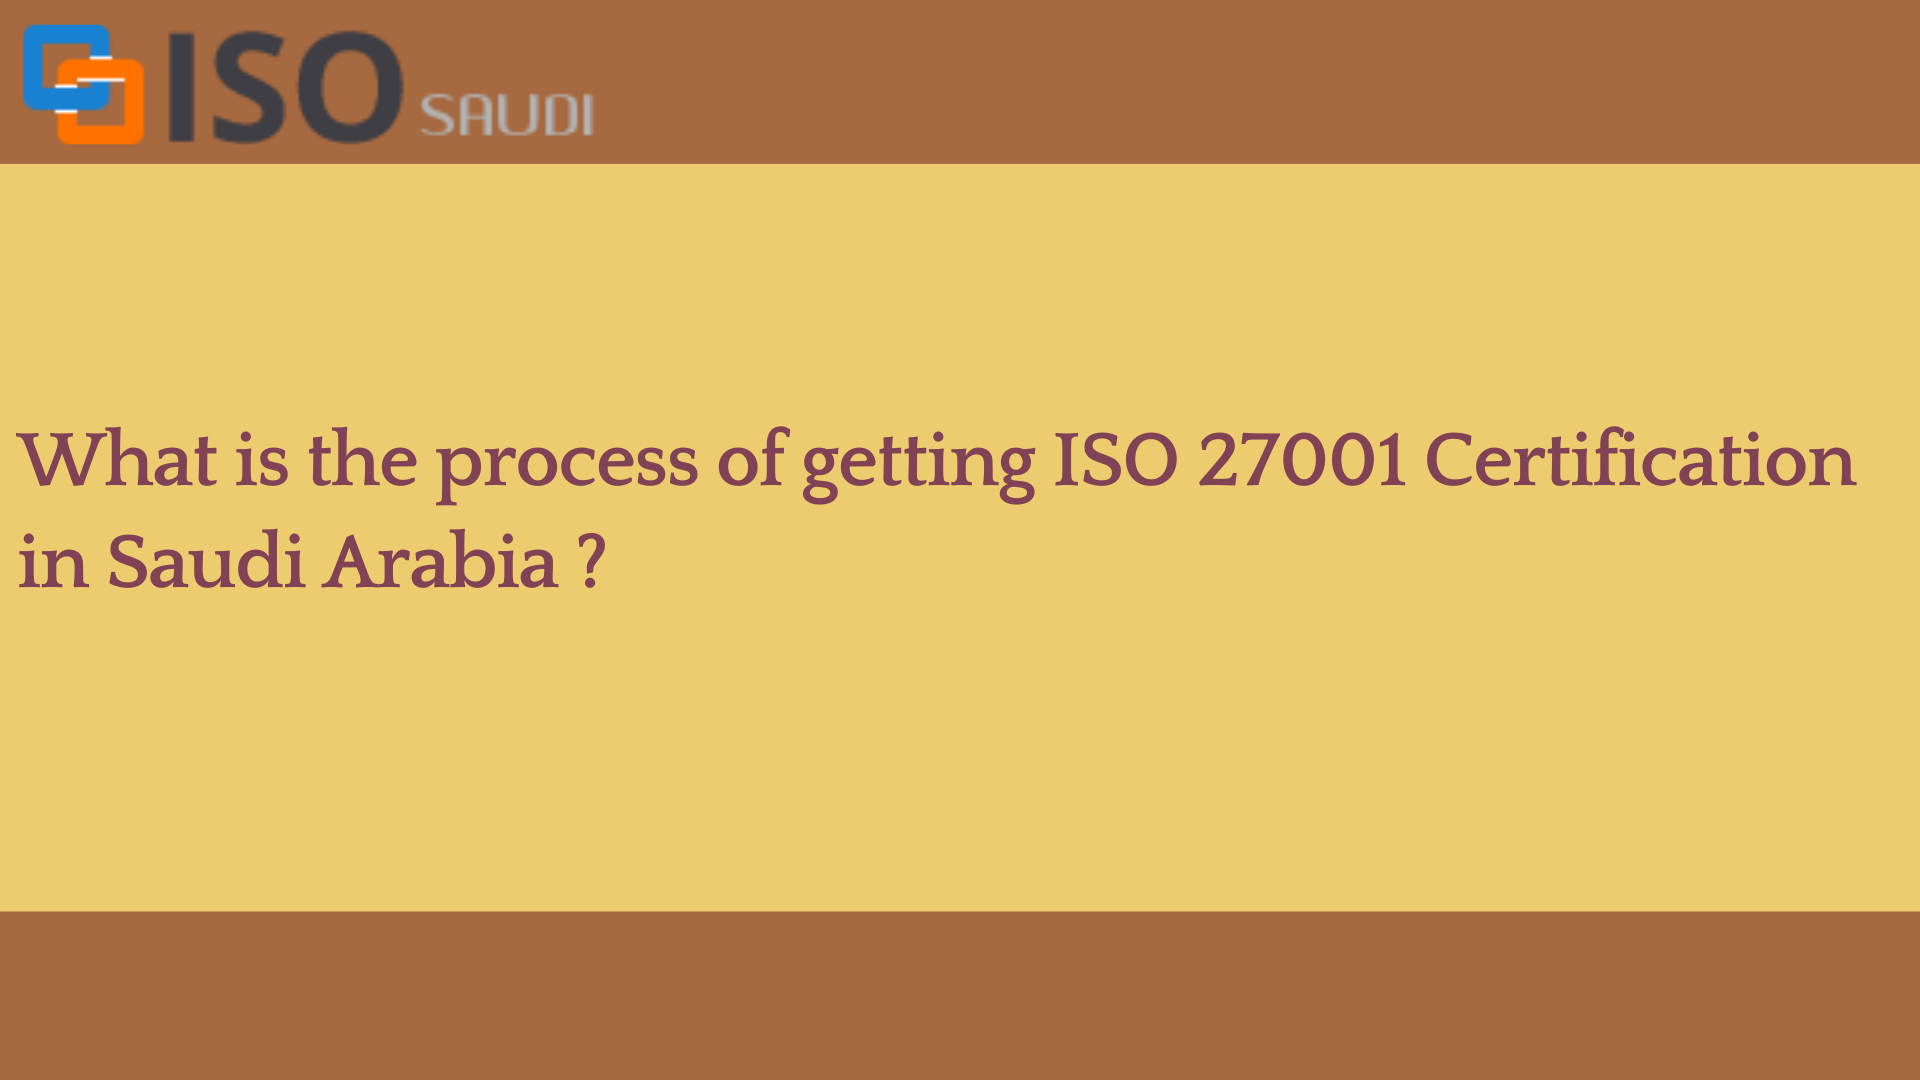 What is the process of getting ISO 27001 Certification in Saudi Arabia ?